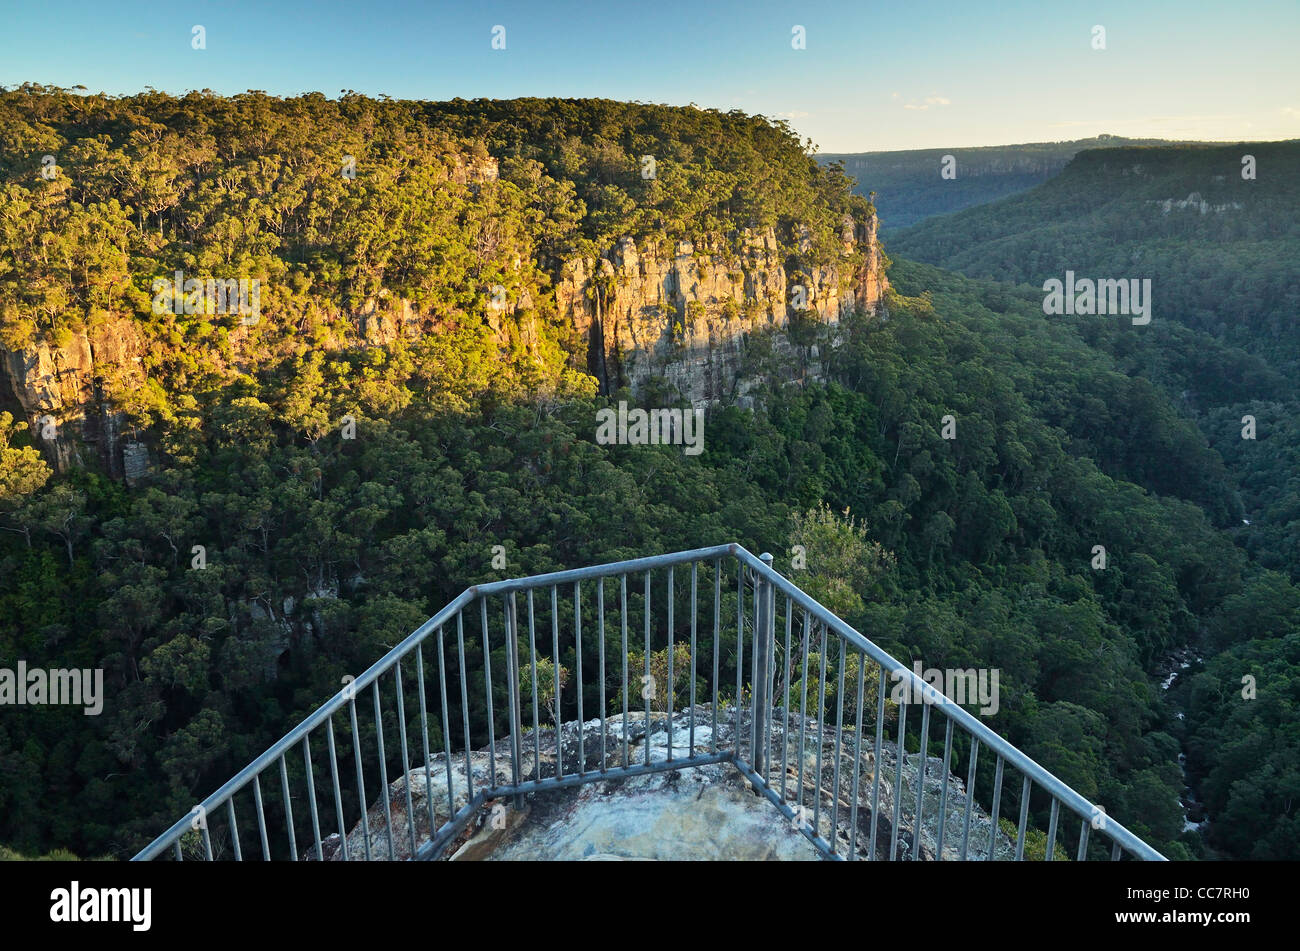 Kangaroo Valley, Parc National de Budderoo, New South Wales, Australie Banque D'Images